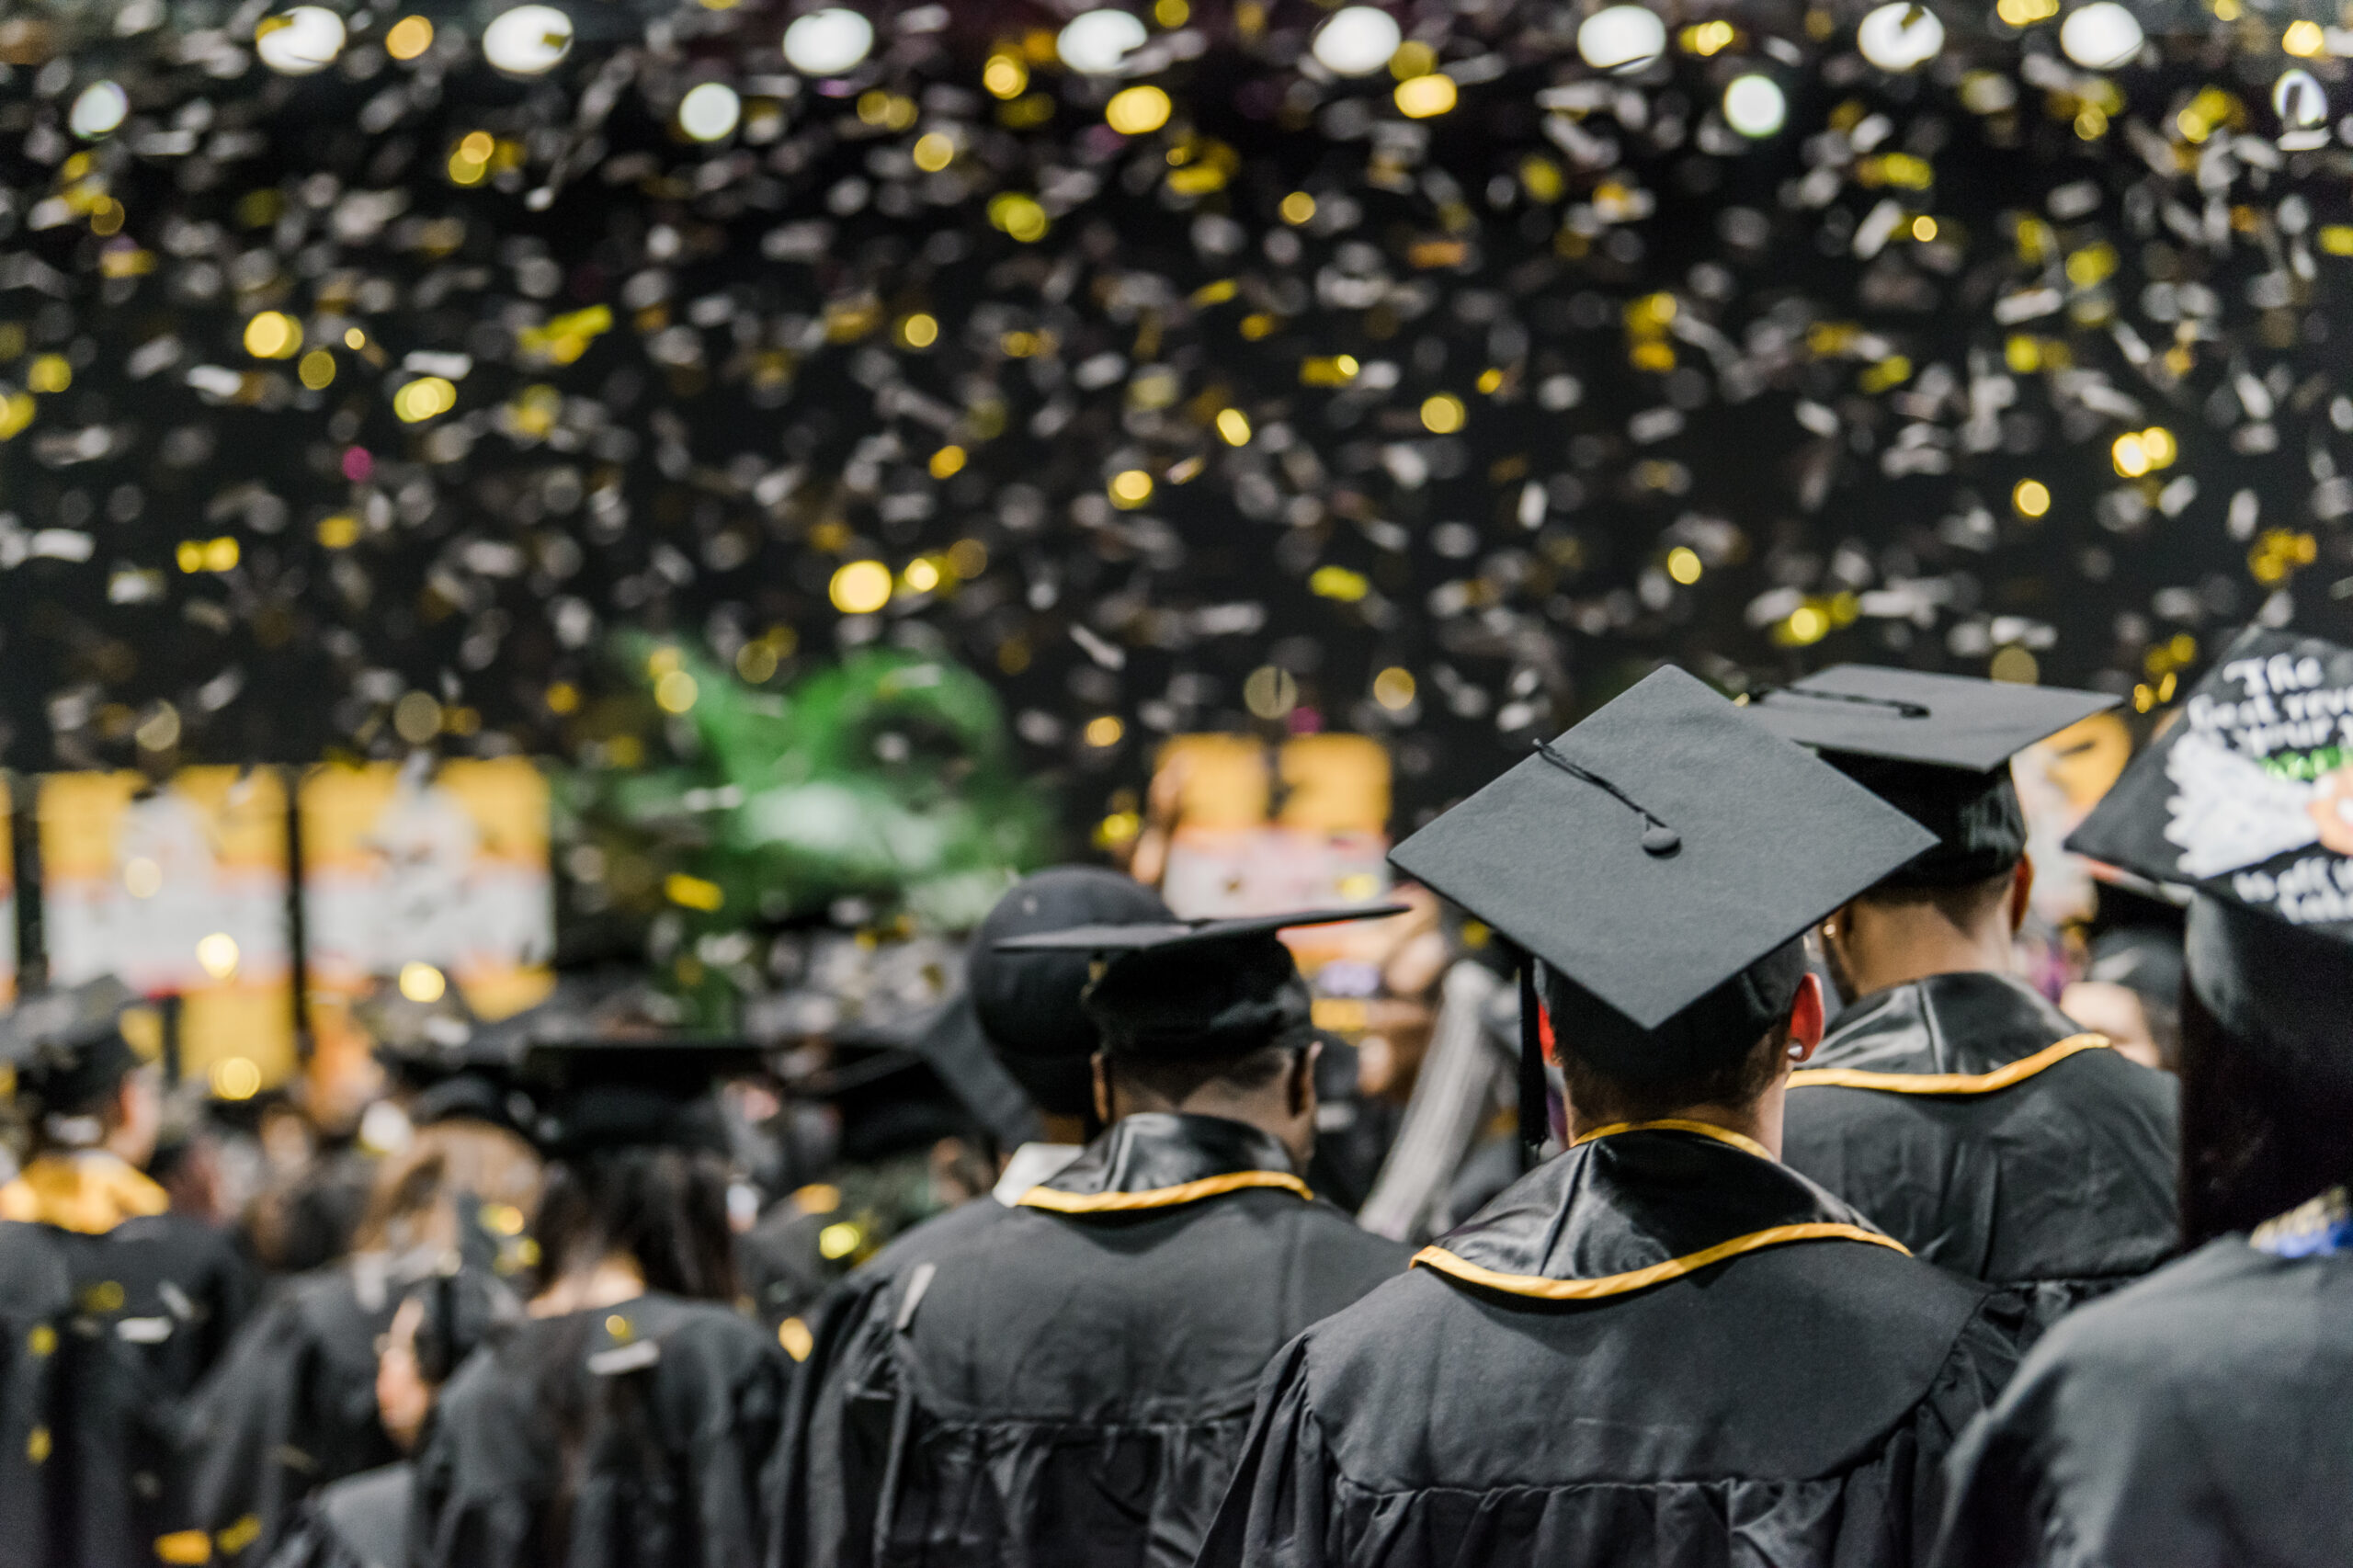 UMBC’s 2023 commencement speakers represent the best of higher education